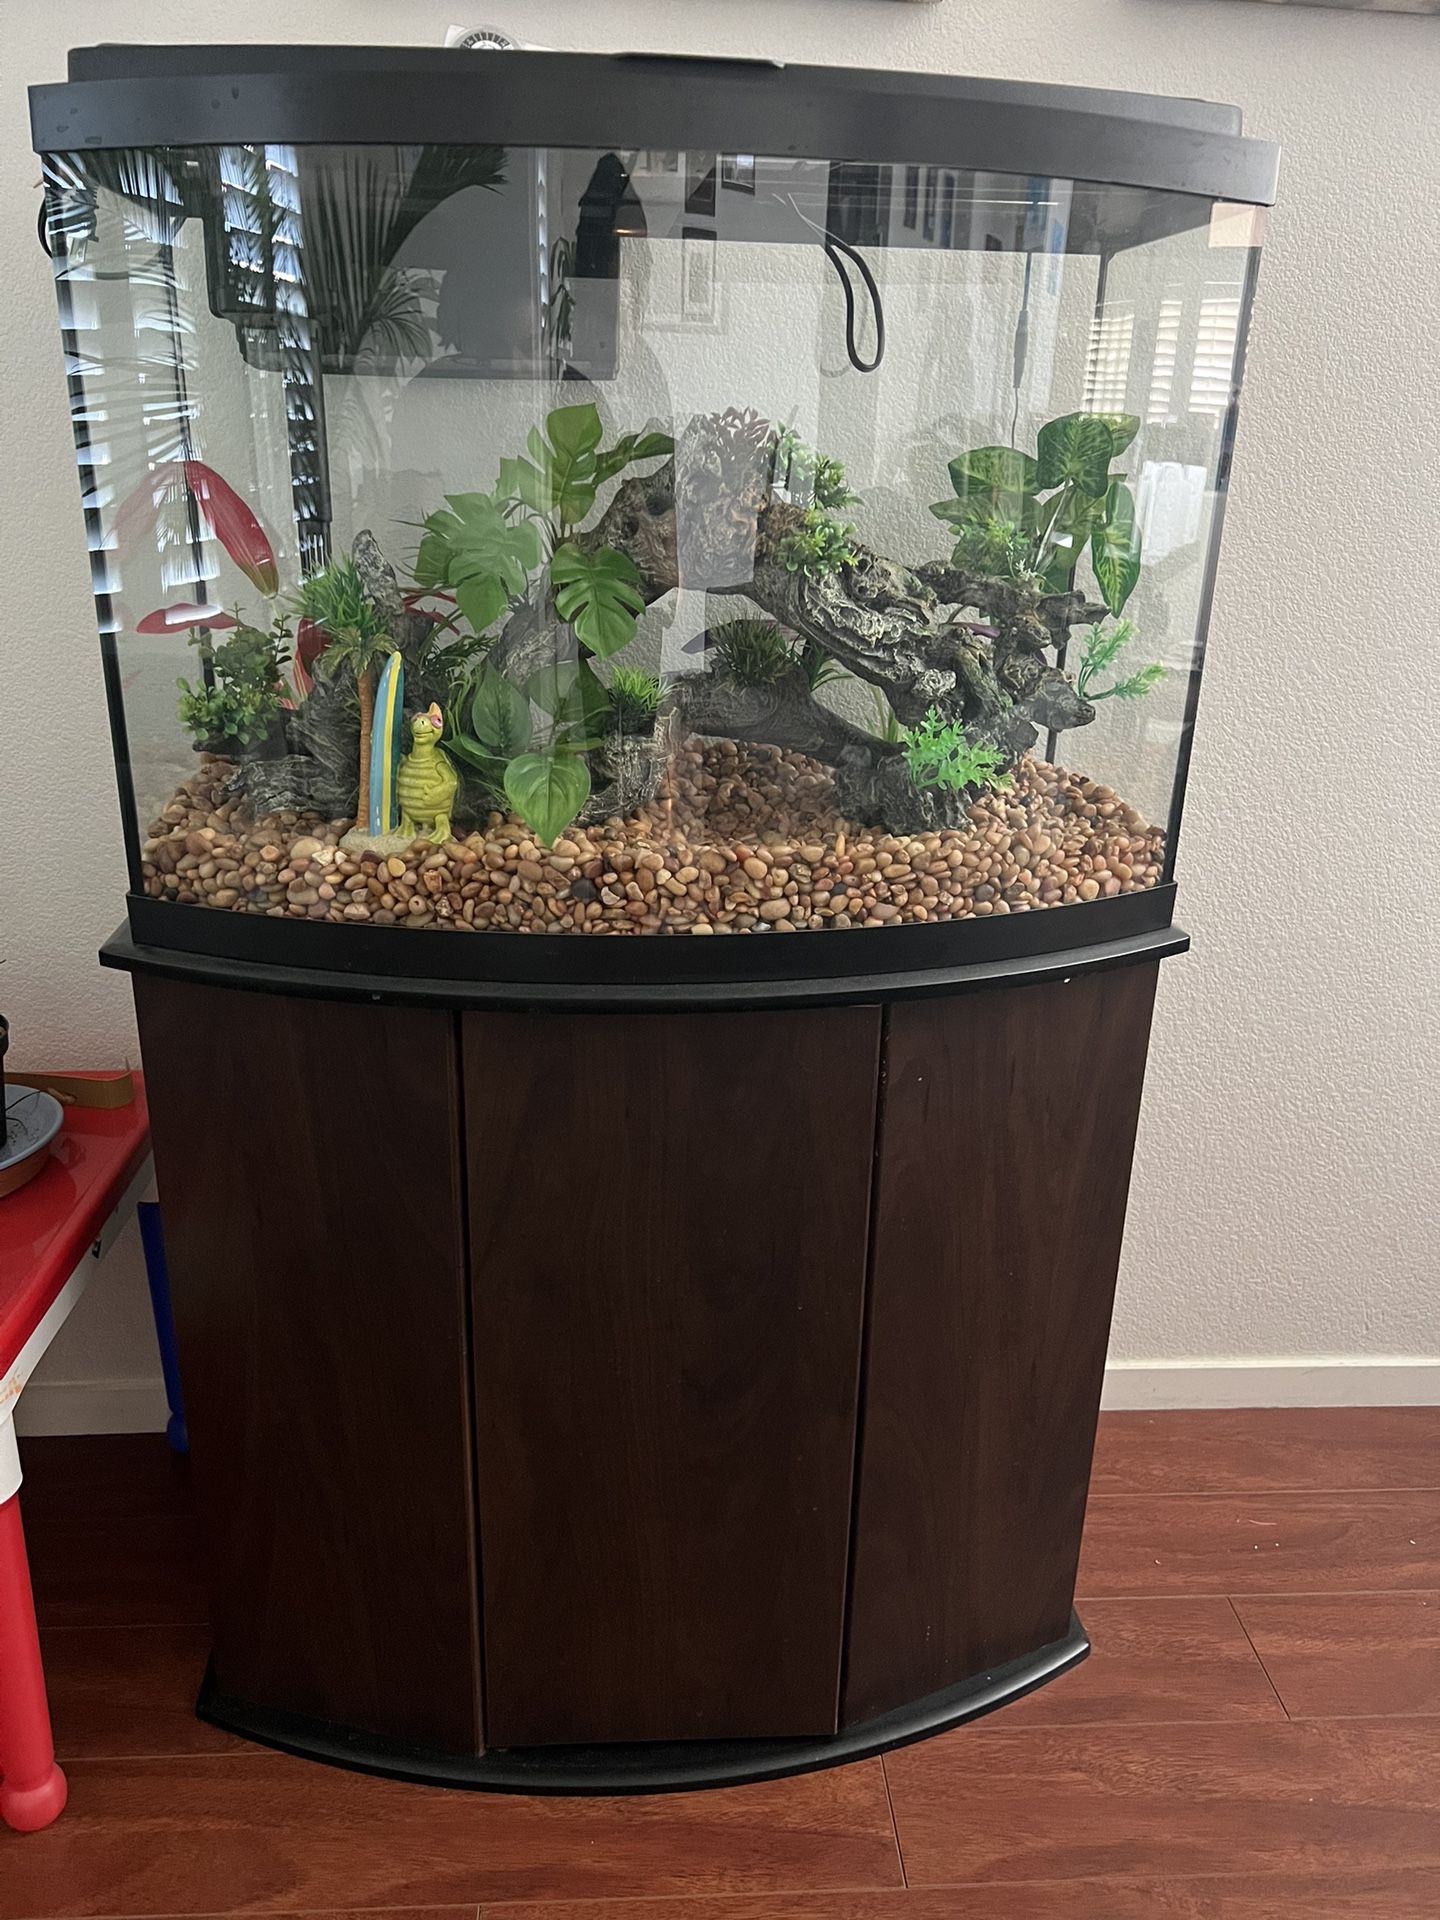 32 Gallon Fish Tank With Decor, Filter, And Care & Cleaning Supplies